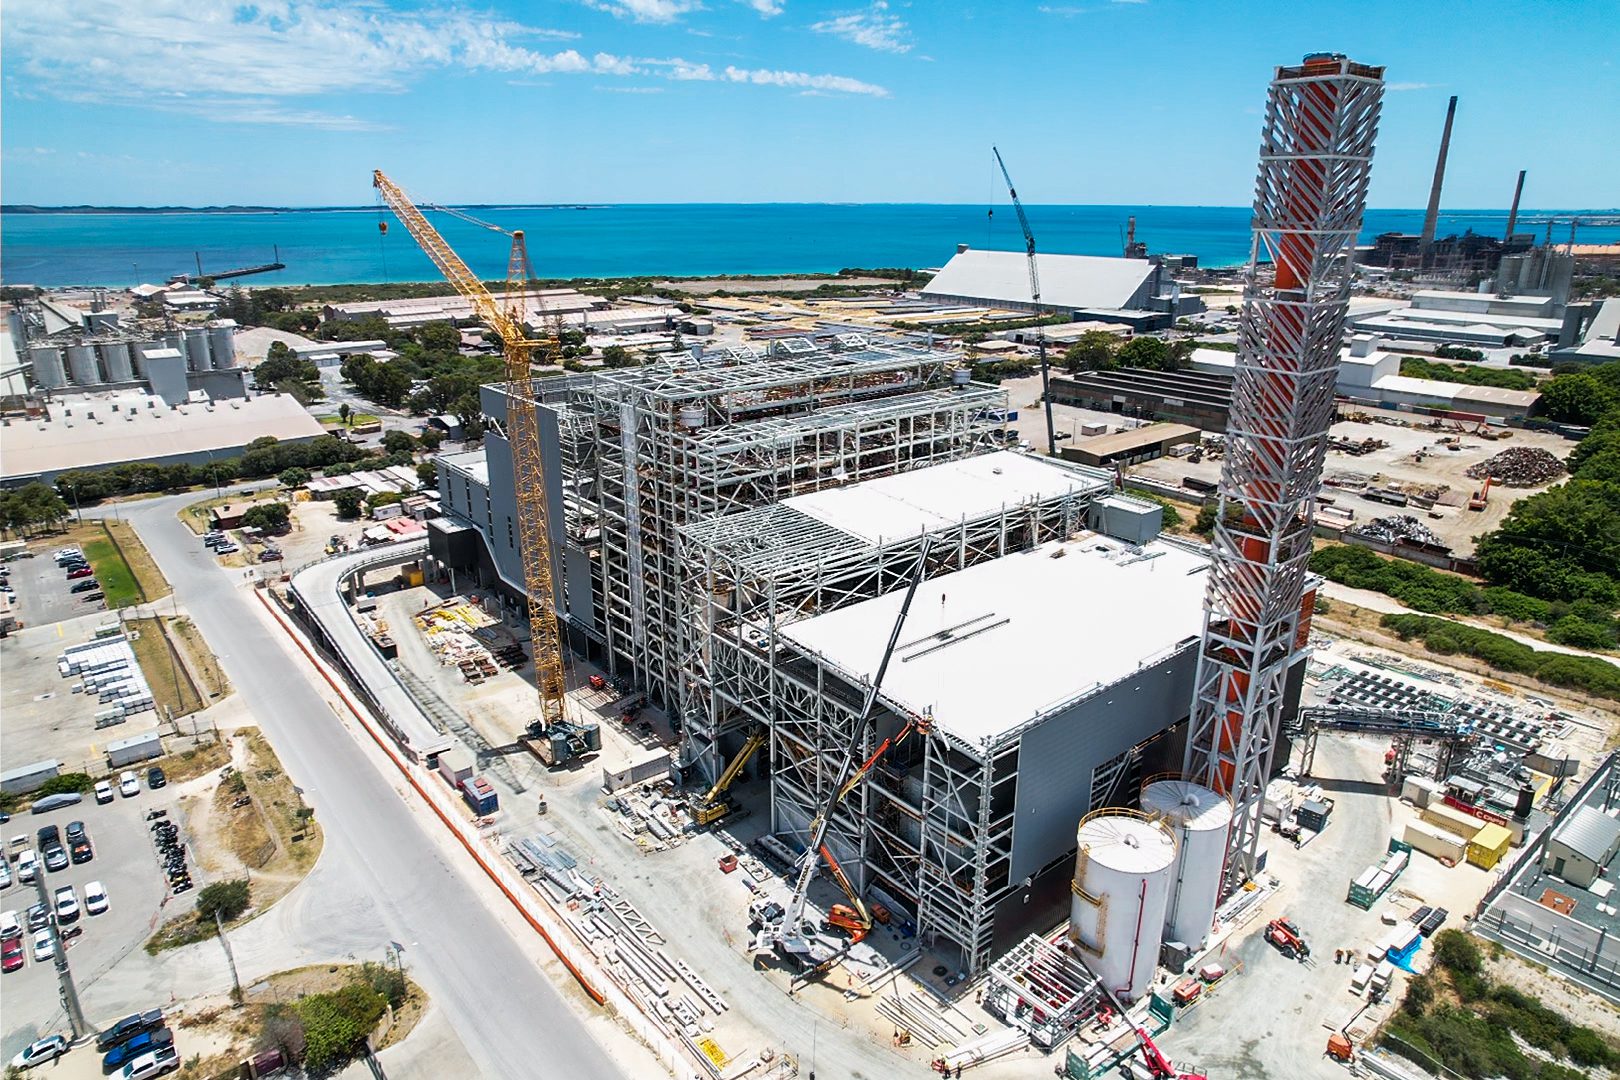 PARC Engineering working at the Kwinana Waste to Energy facility